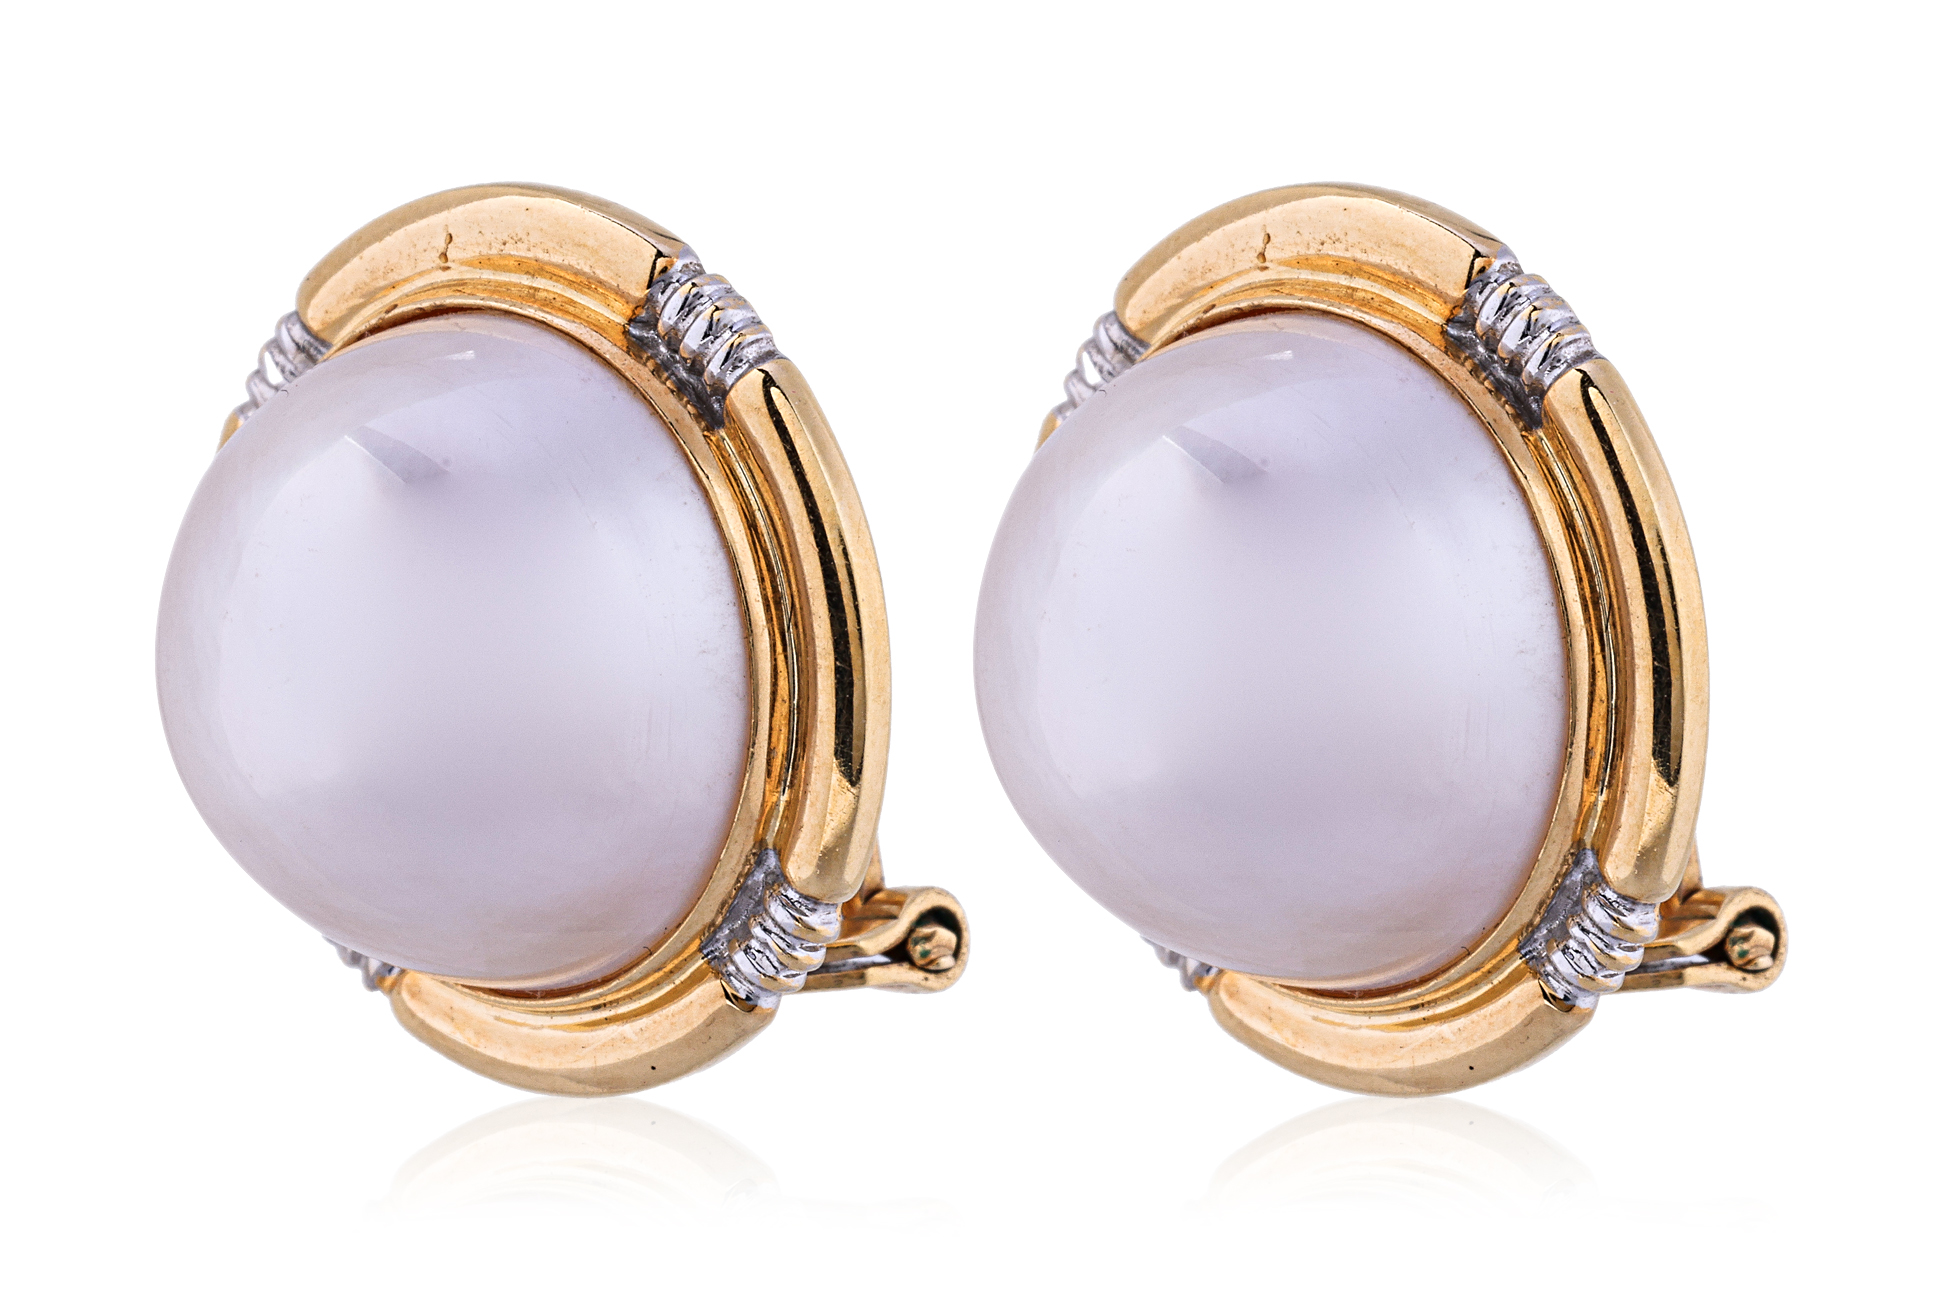 A PAIR OF MABE PEARL EARRINGS - Image 2 of 4